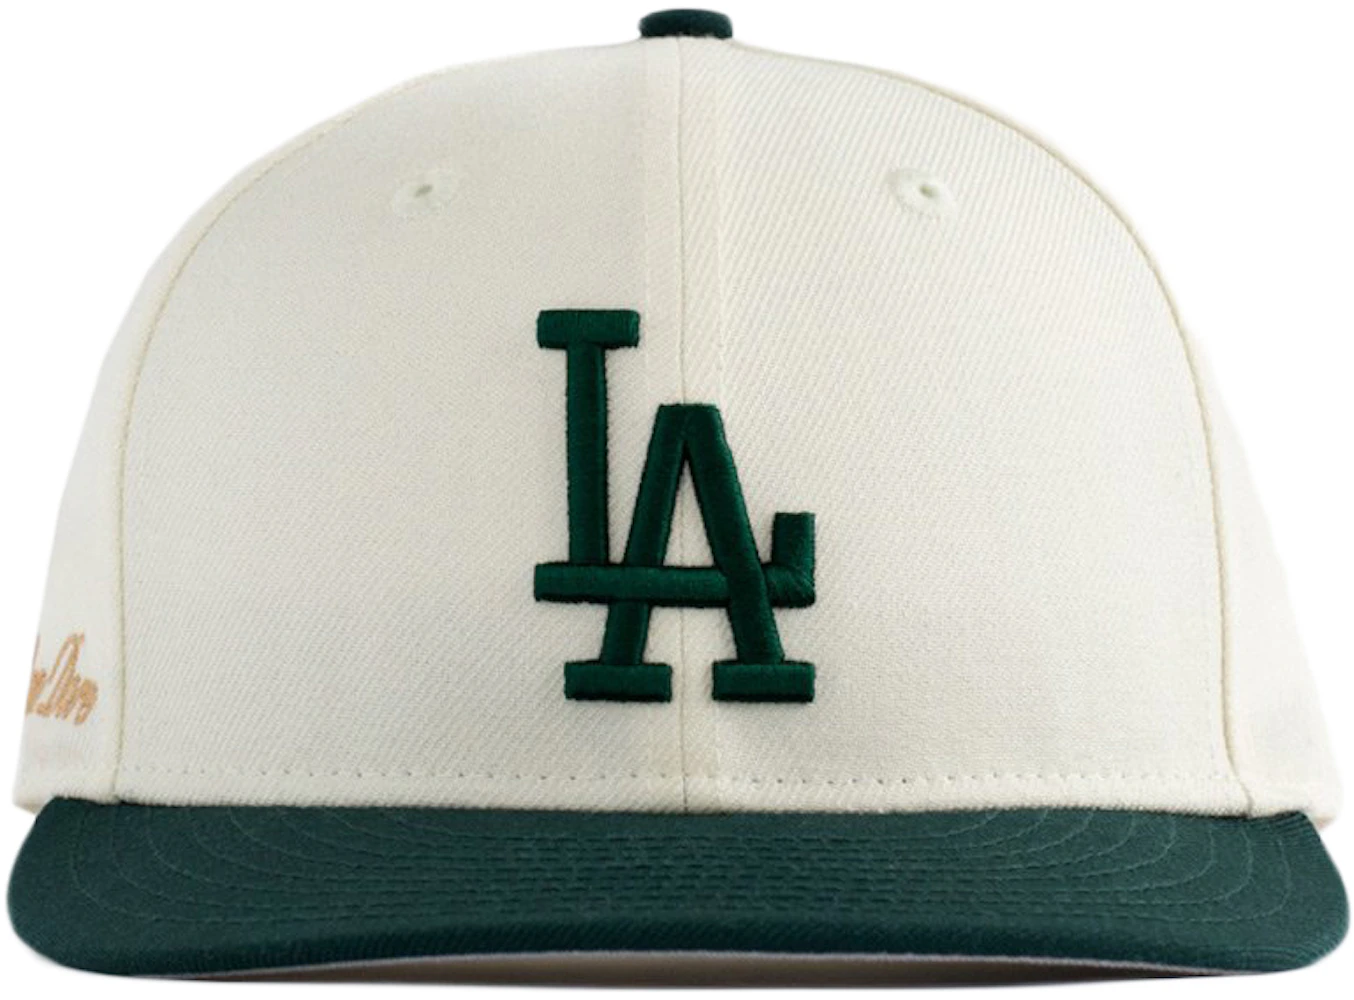 Forest Green Los Angeles Dodgers ‘47 Brand Baseball Hat